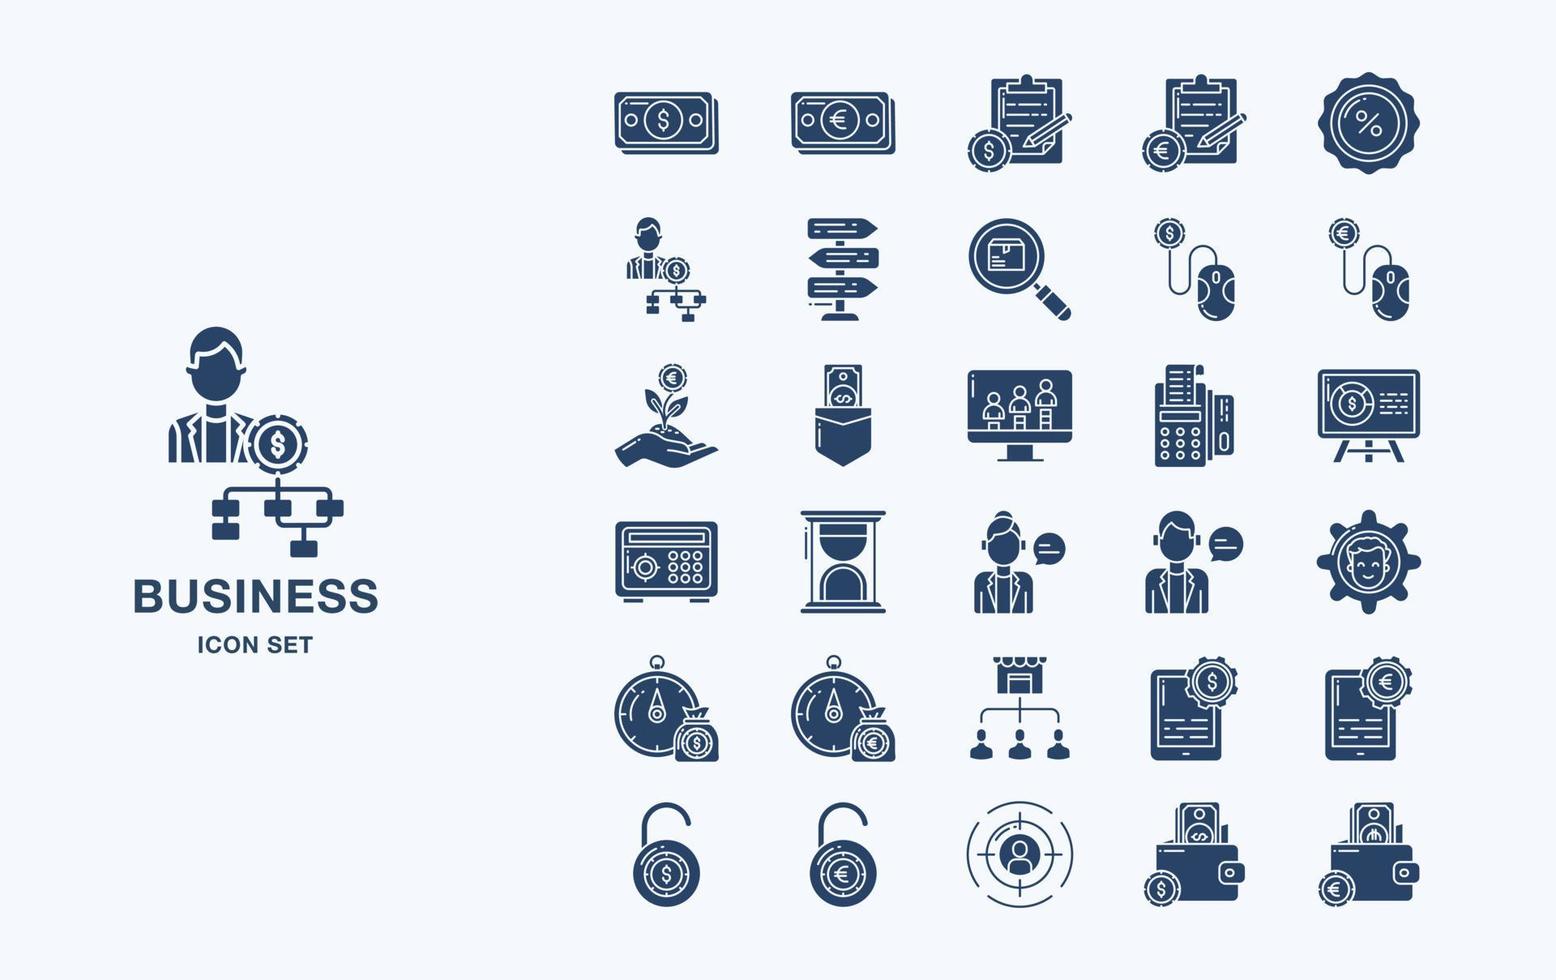 Business and finance vector icon set